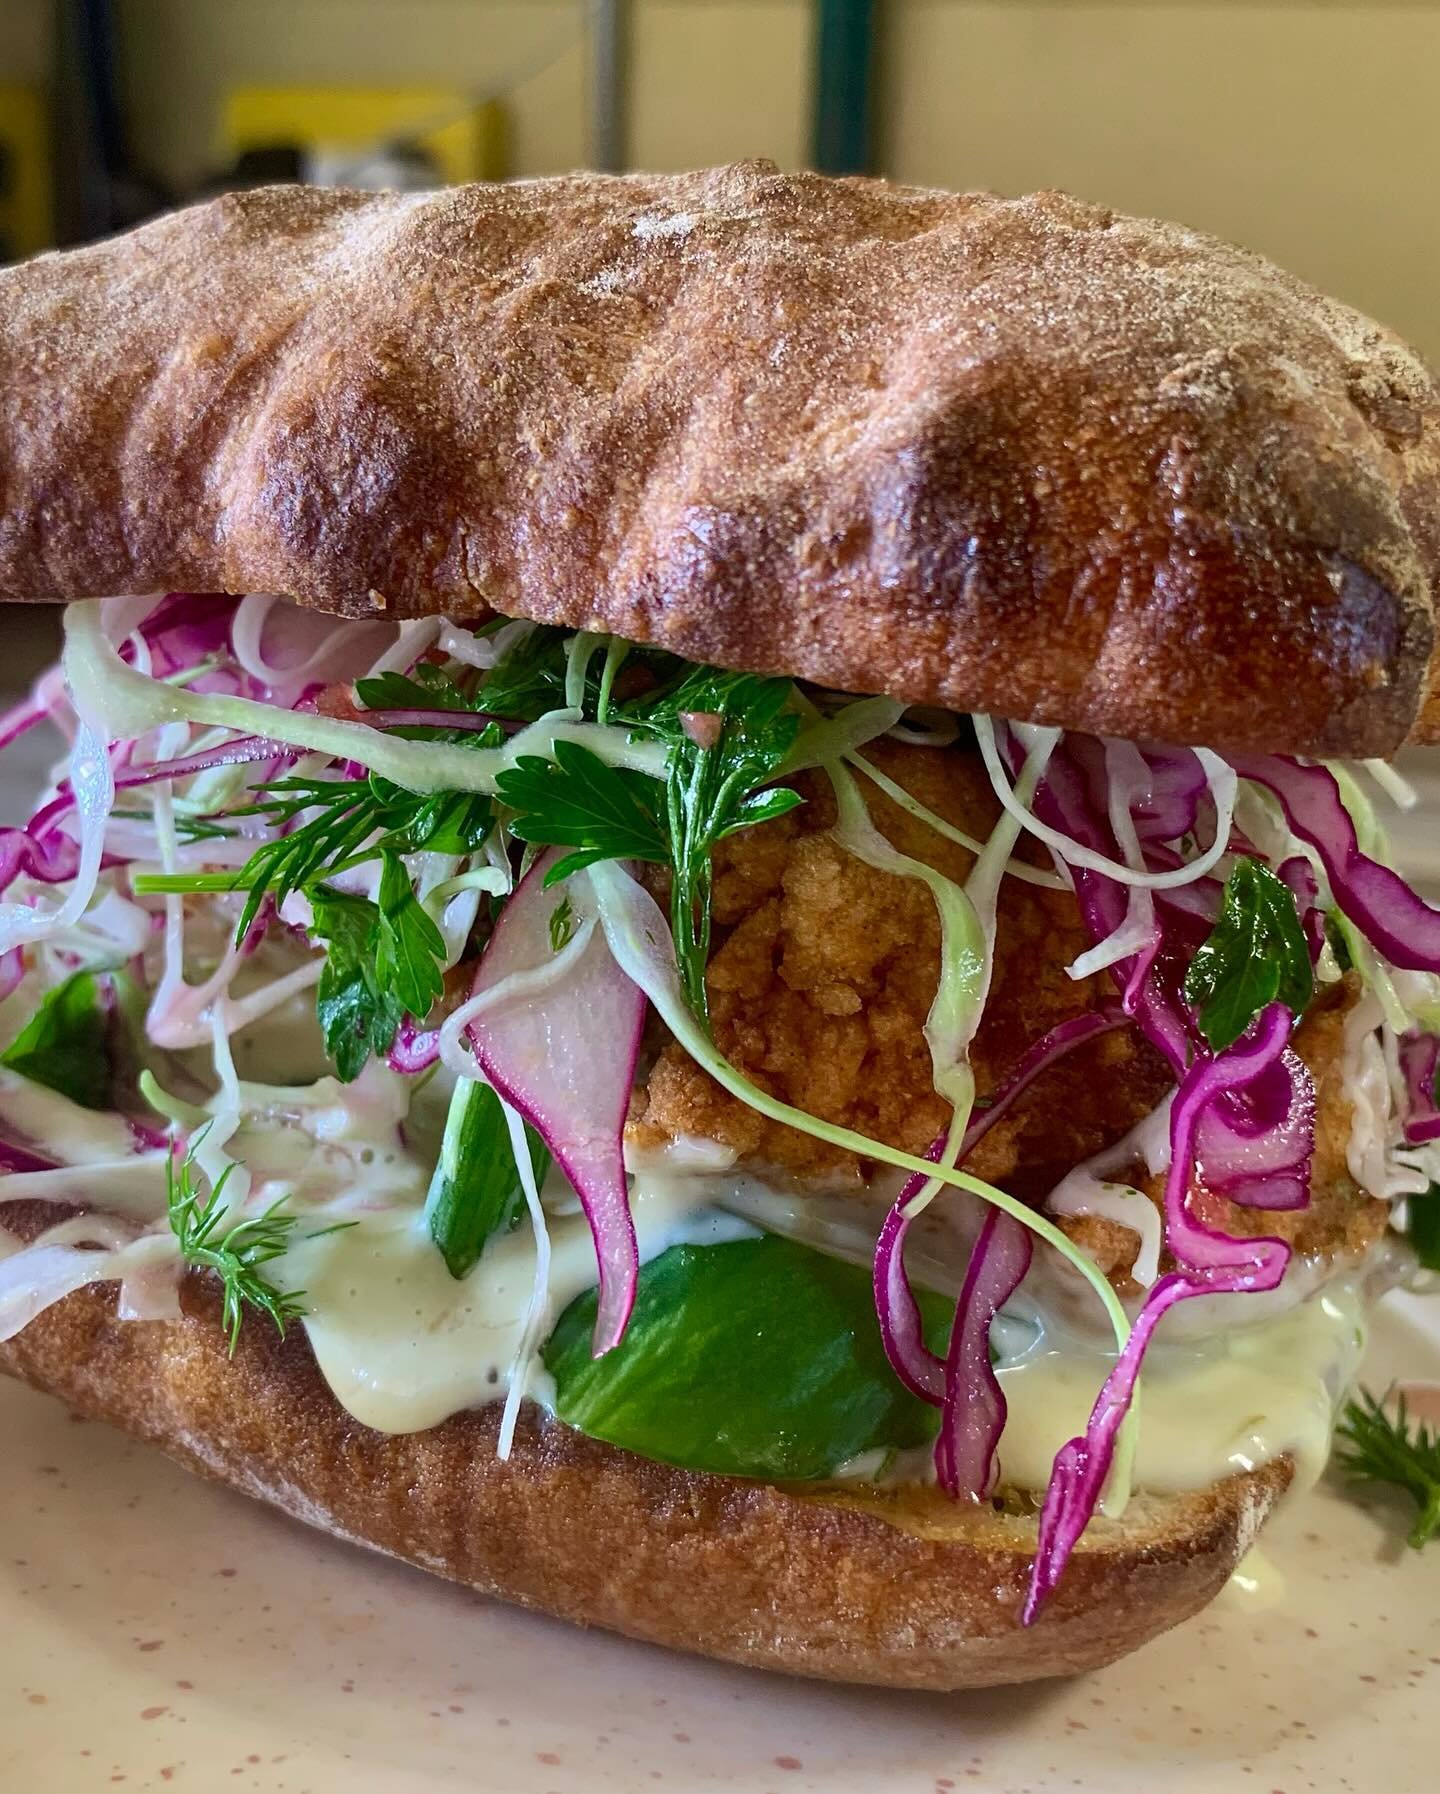 So. After 3.5 years of debate we are finally running a fried chicken sandwich. Aurelia isn&rsquo;t in full support of my choices, but you know what? She&rsquo;s outta the country and the inmates are running the prison! Fried chicken thighs, green gar